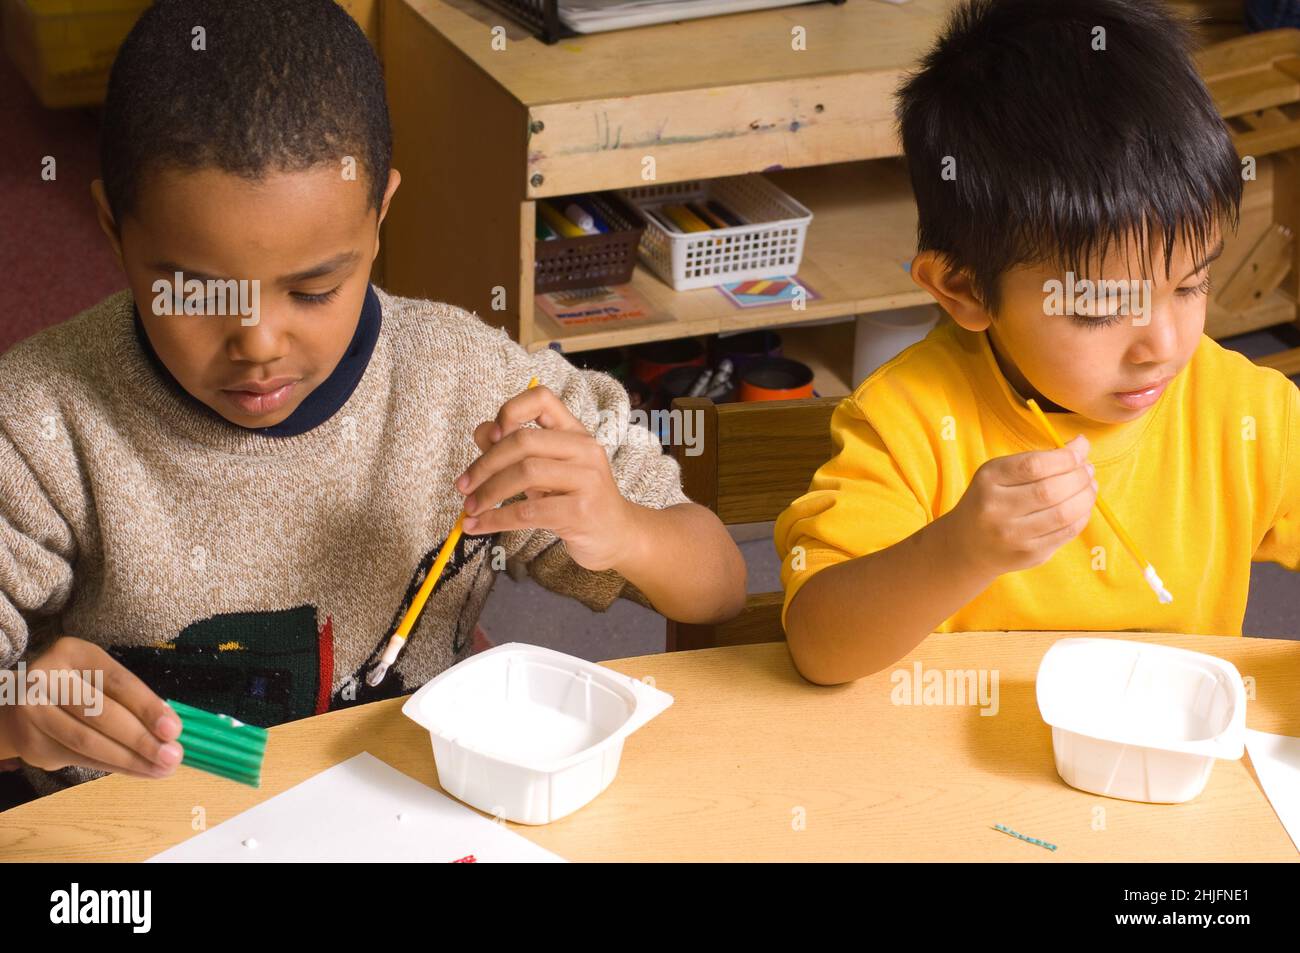 Education Preschool classroom 4-5 year olds art activity two boys sitting side by side using paint brushes to apply glue, using opposite hands Stock Photo